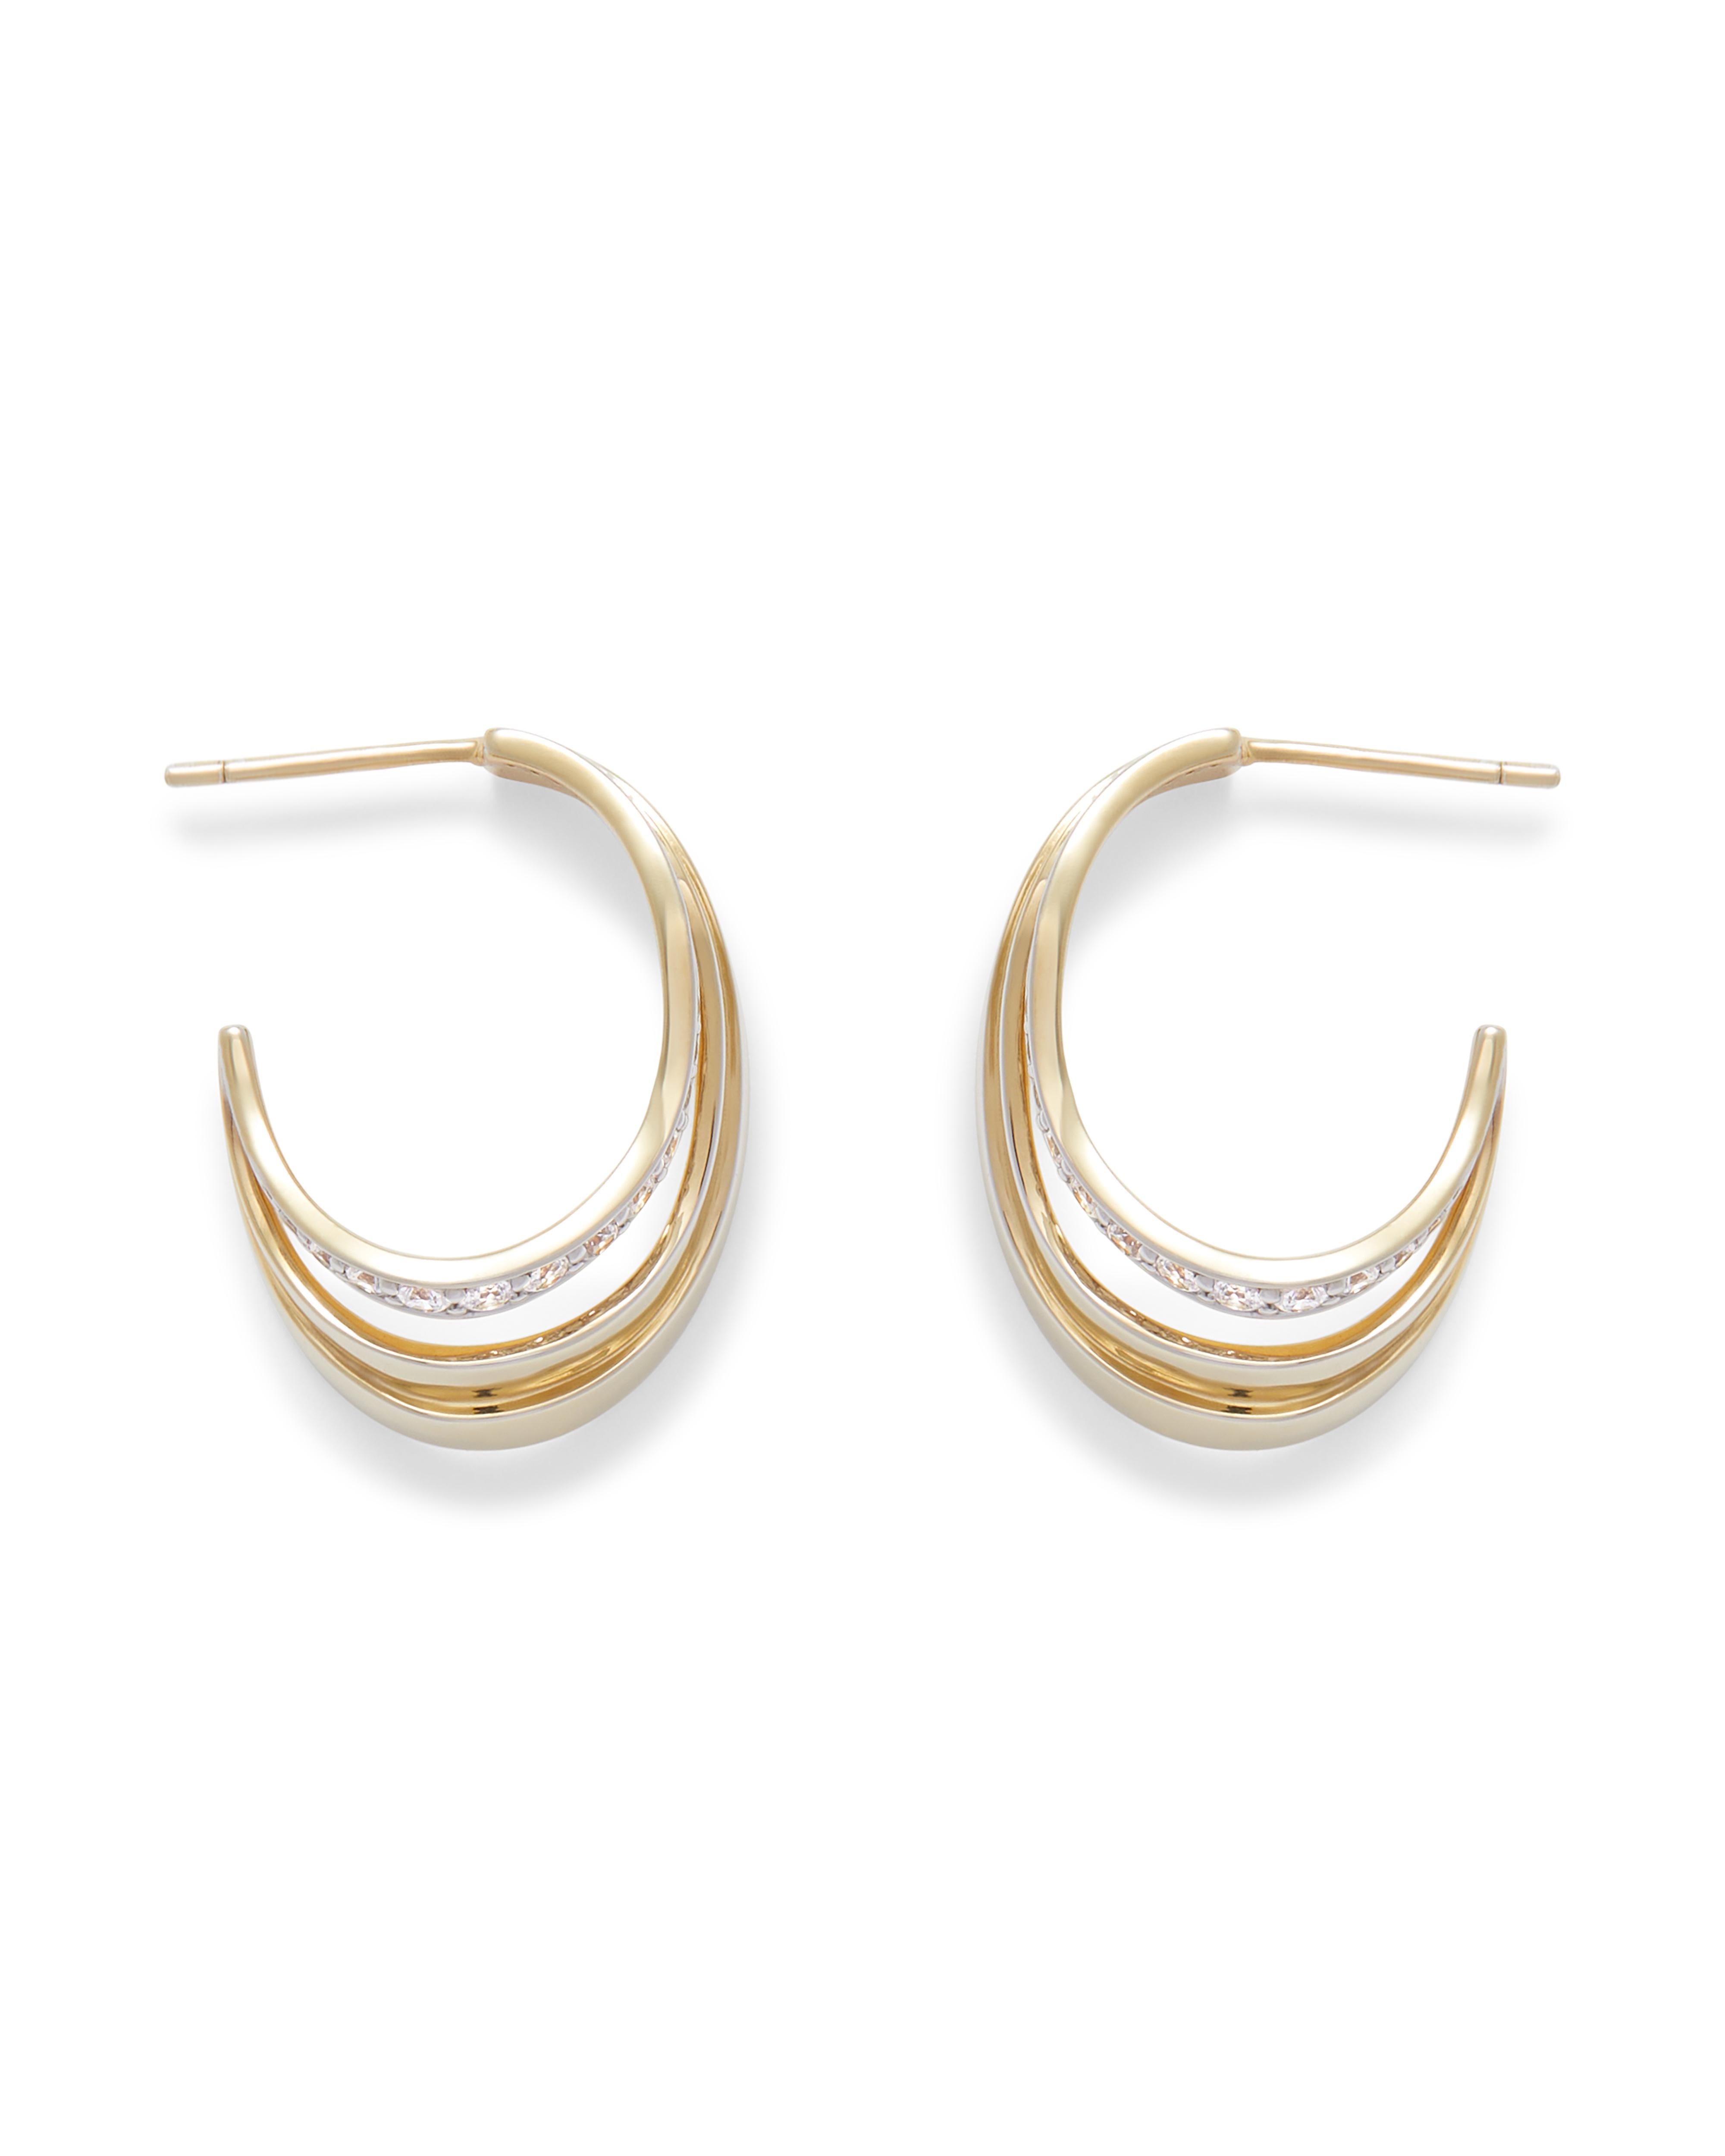 Contemporary Casey Perez 18K Gold Sculptural Waved Hoop earring with 1 Carat of Diamonds For Sale